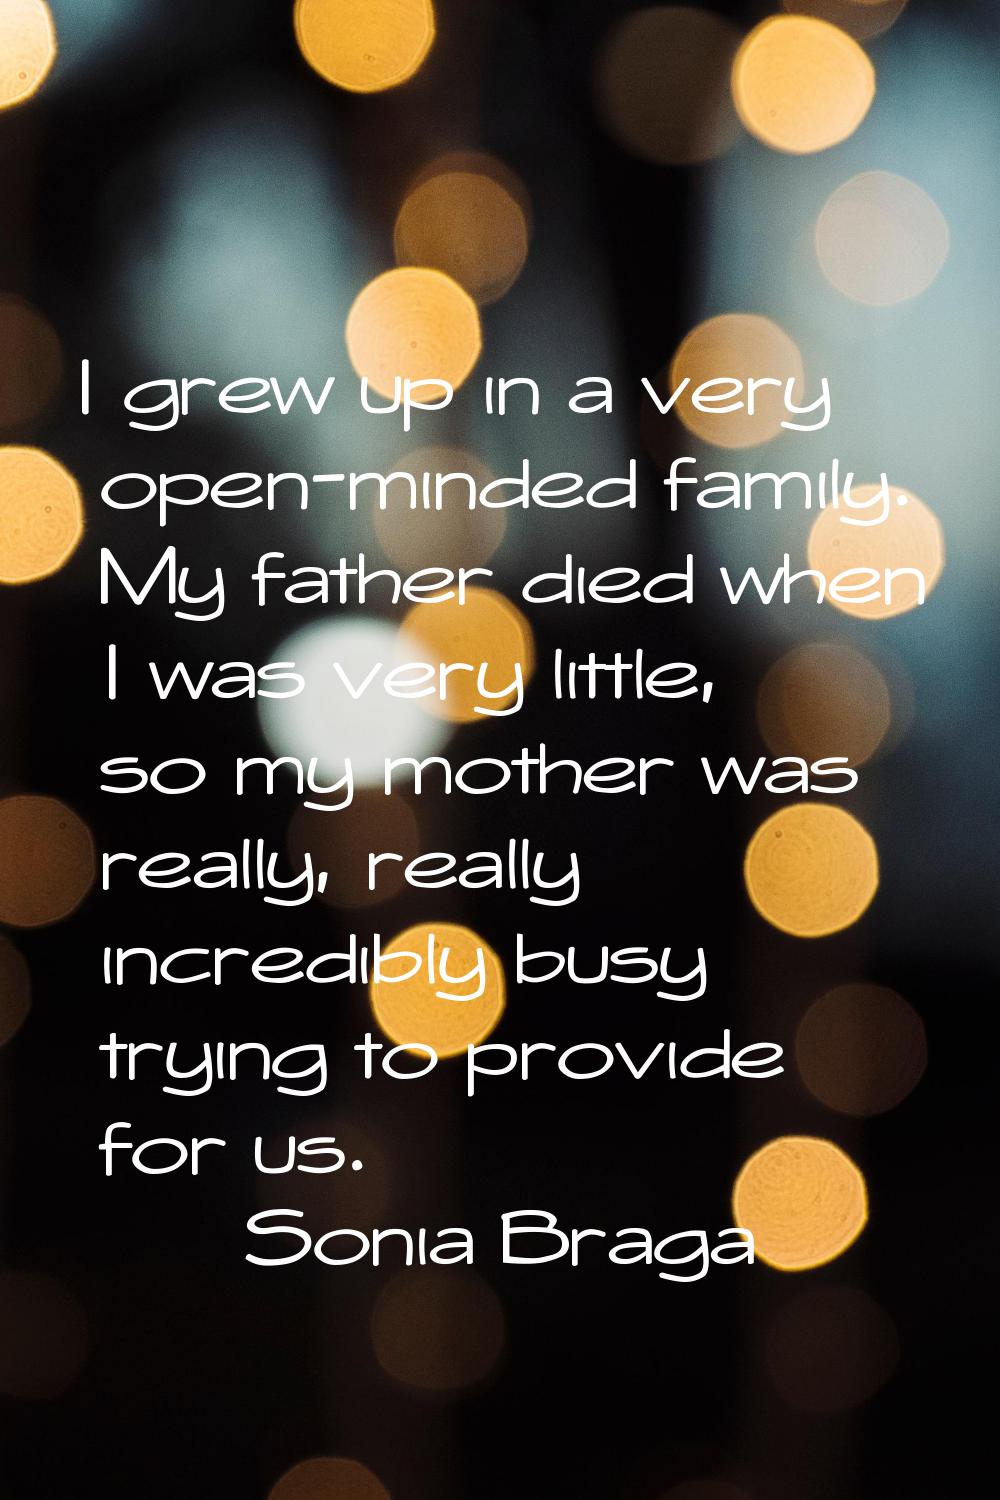 I grew up in a very open-minded family. My father died when I was very little, so my mother was rea